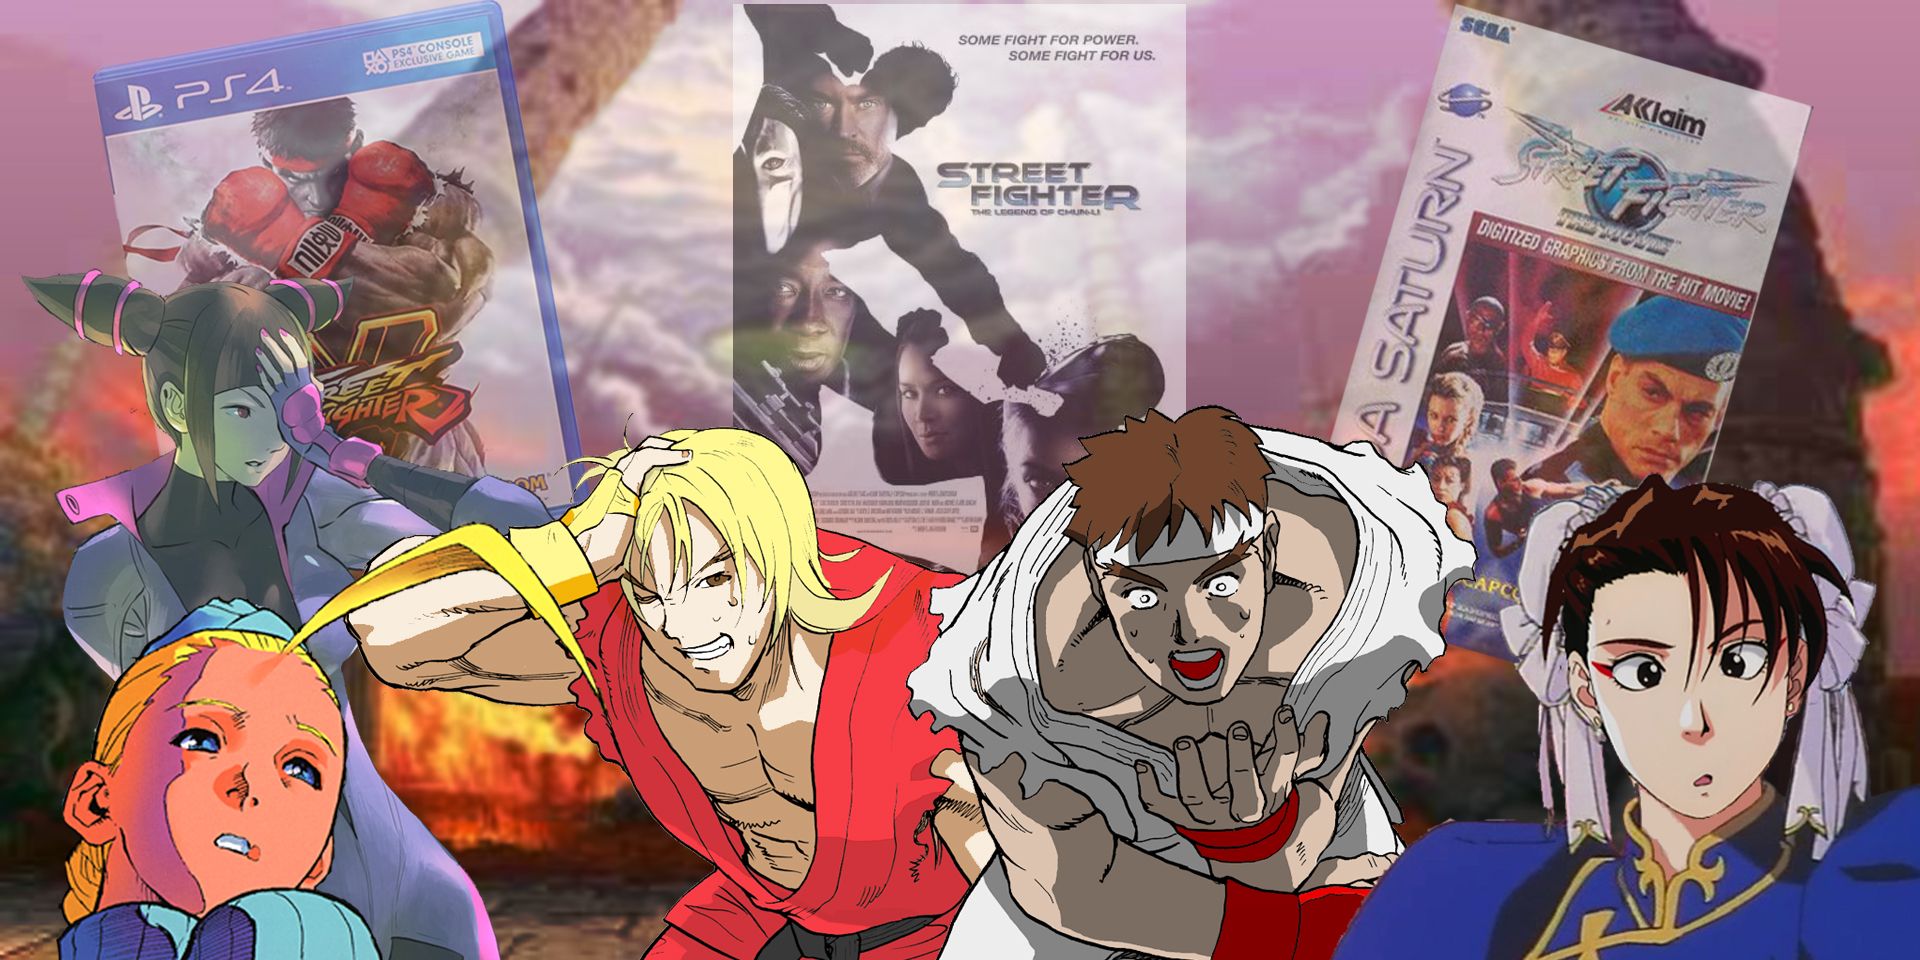 The Street Fighter characters recoil in horror over the franchises' failures.